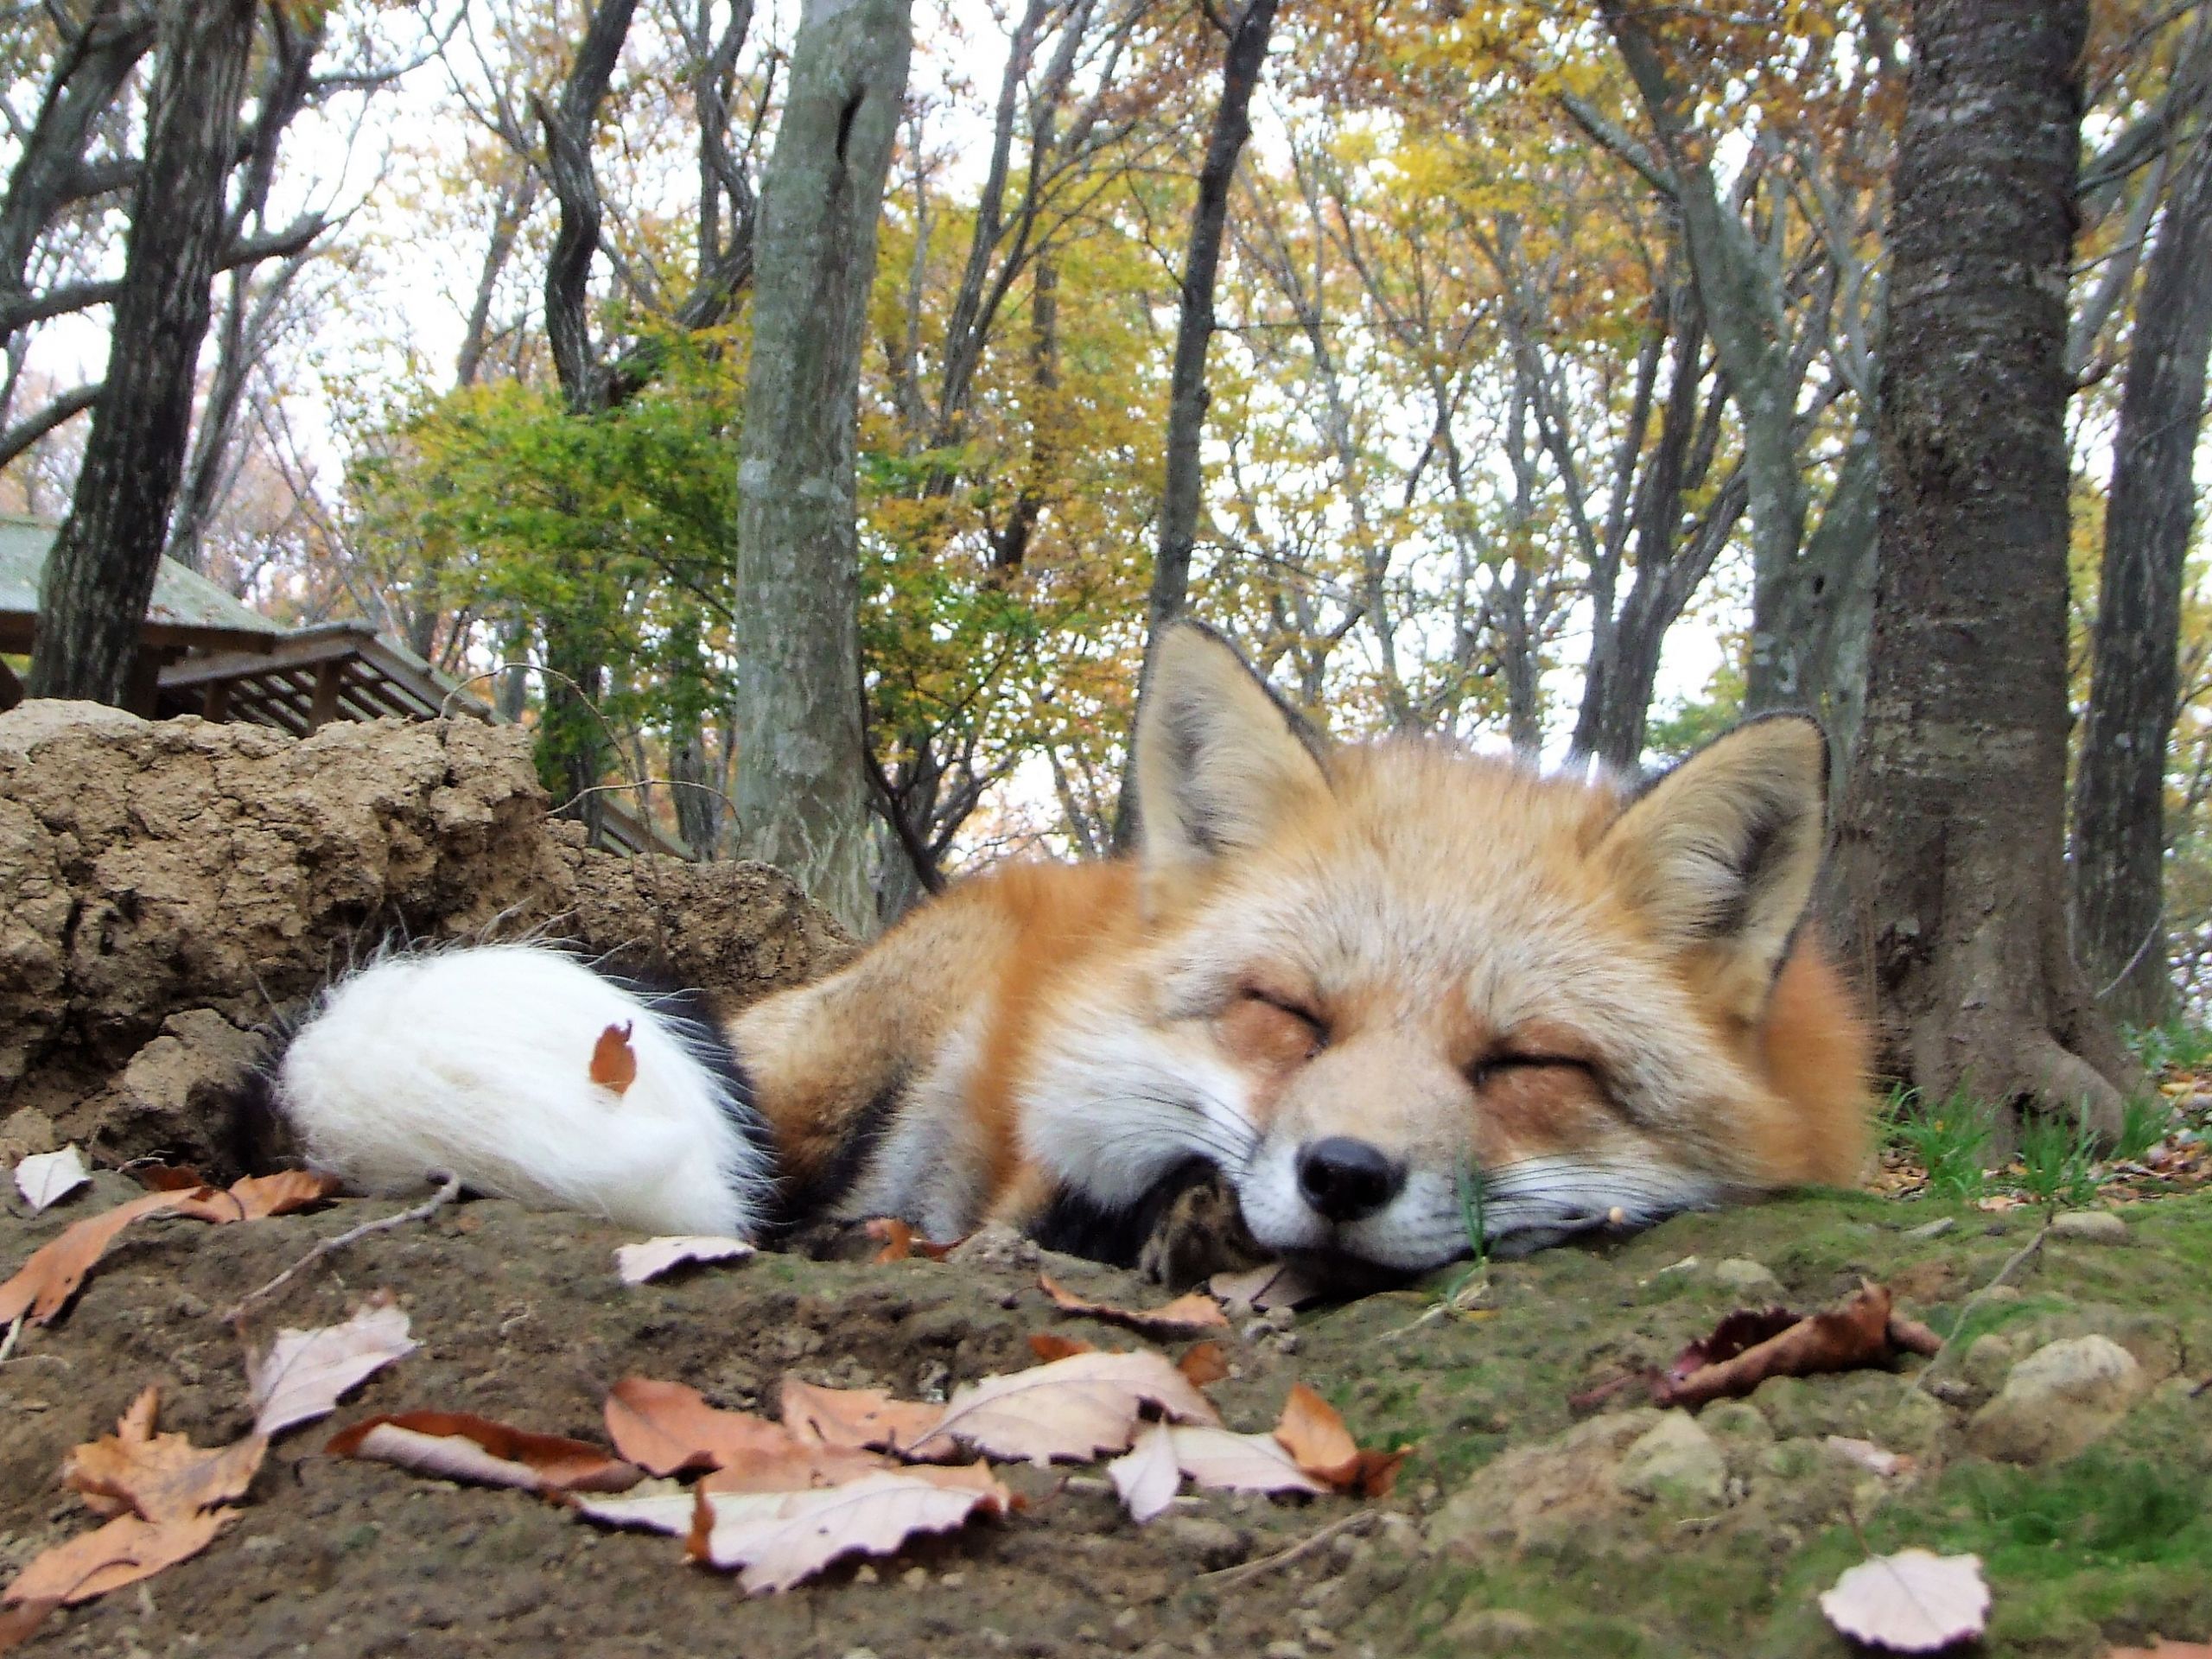 Cuddle their fluffy foxes! A rare zoo with more than 100 foxes where you can see and cuddle them. “Miyagi Zao Fox Village”